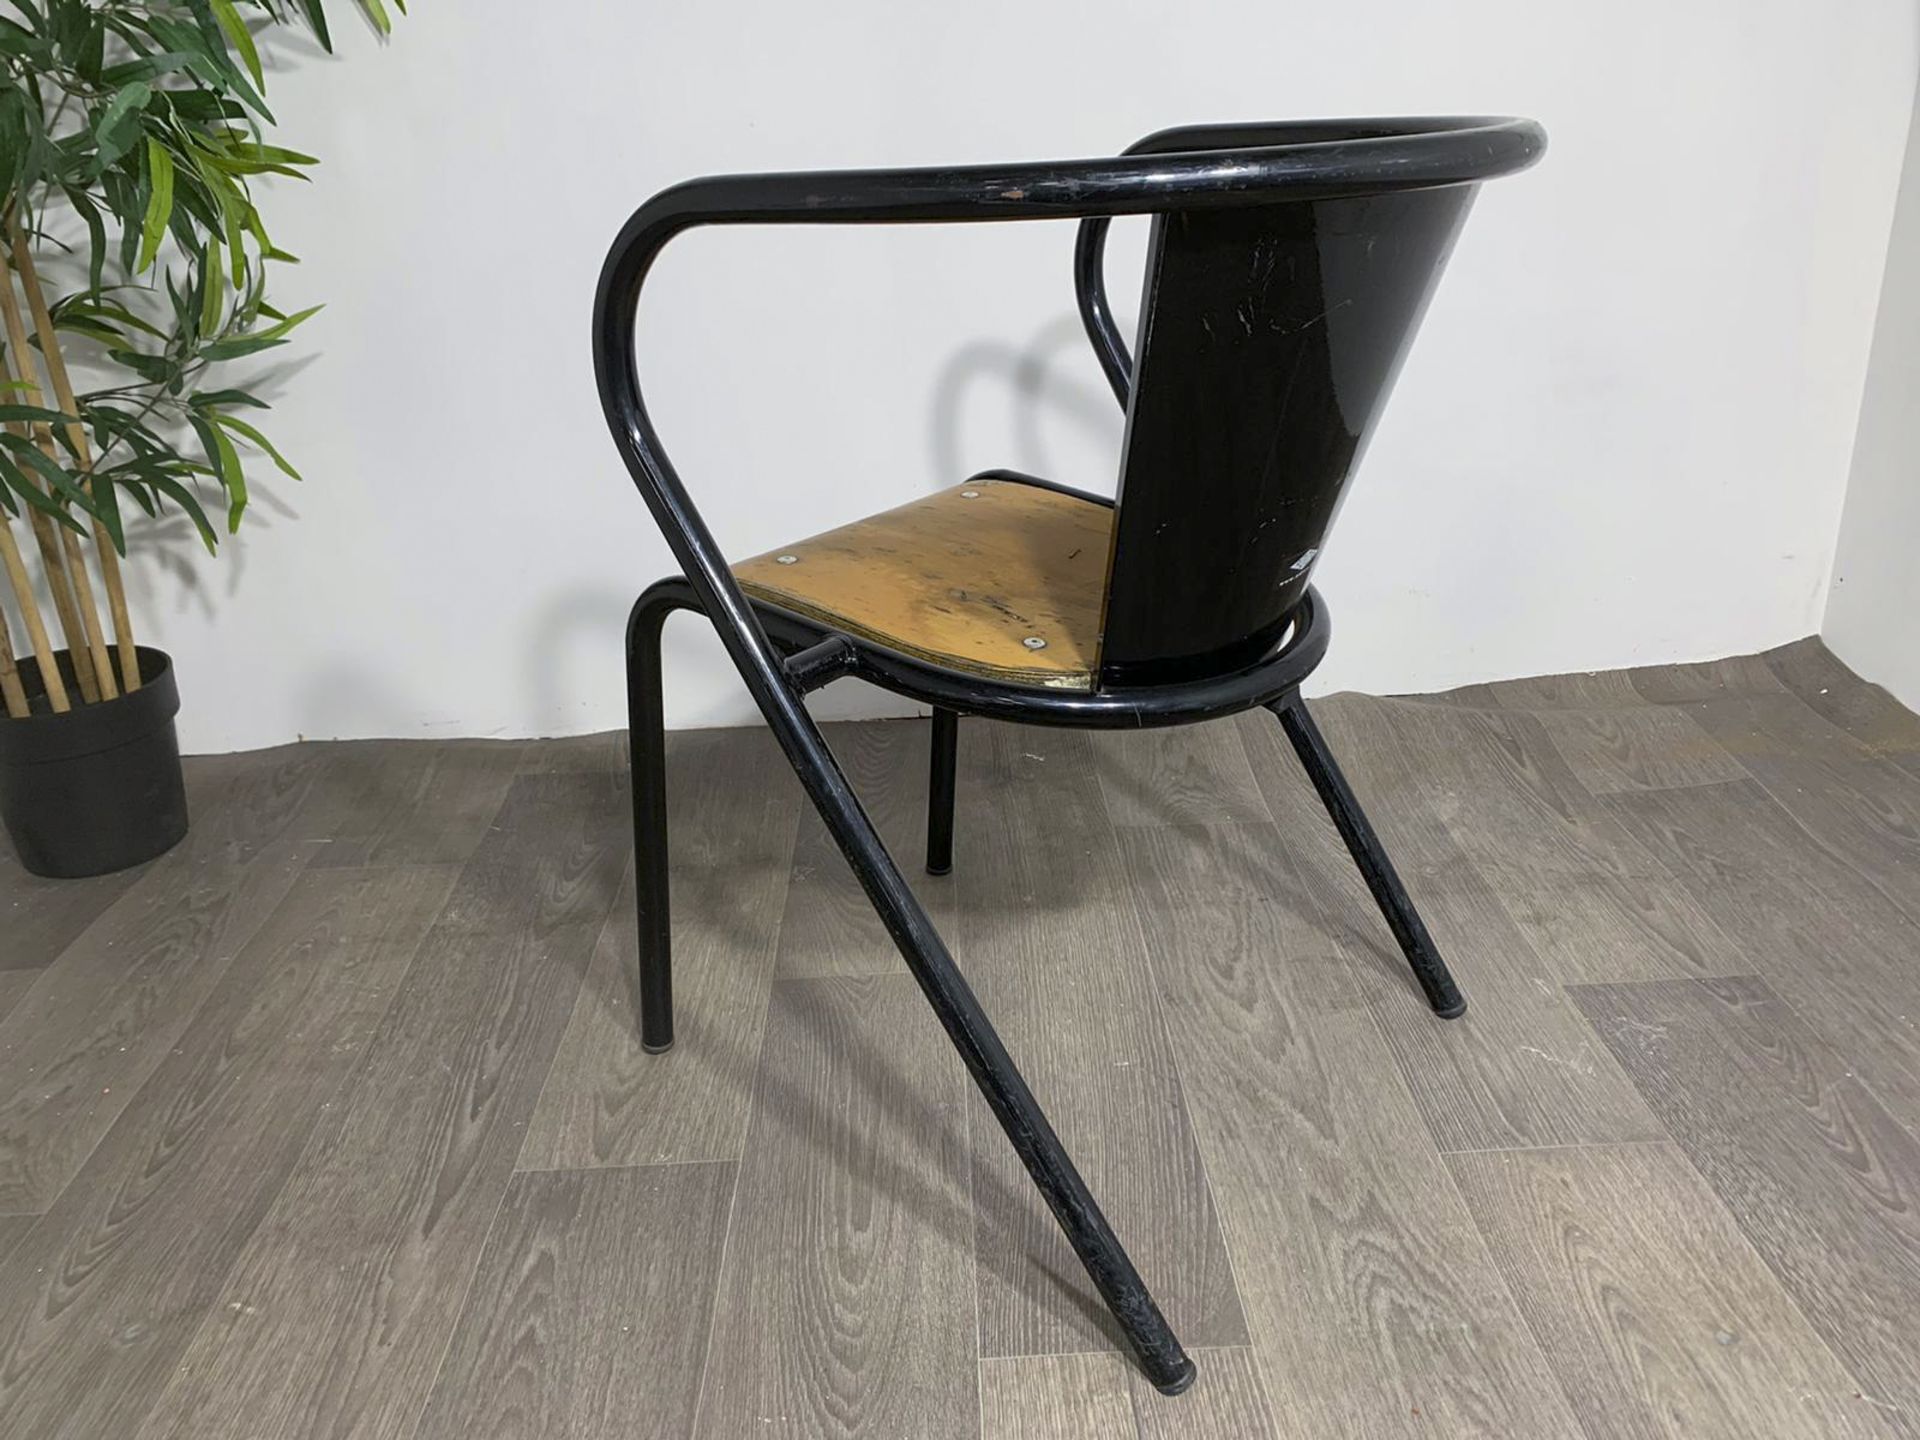 Adico 5008 Black Chair With Wooden Seat - Image 2 of 8